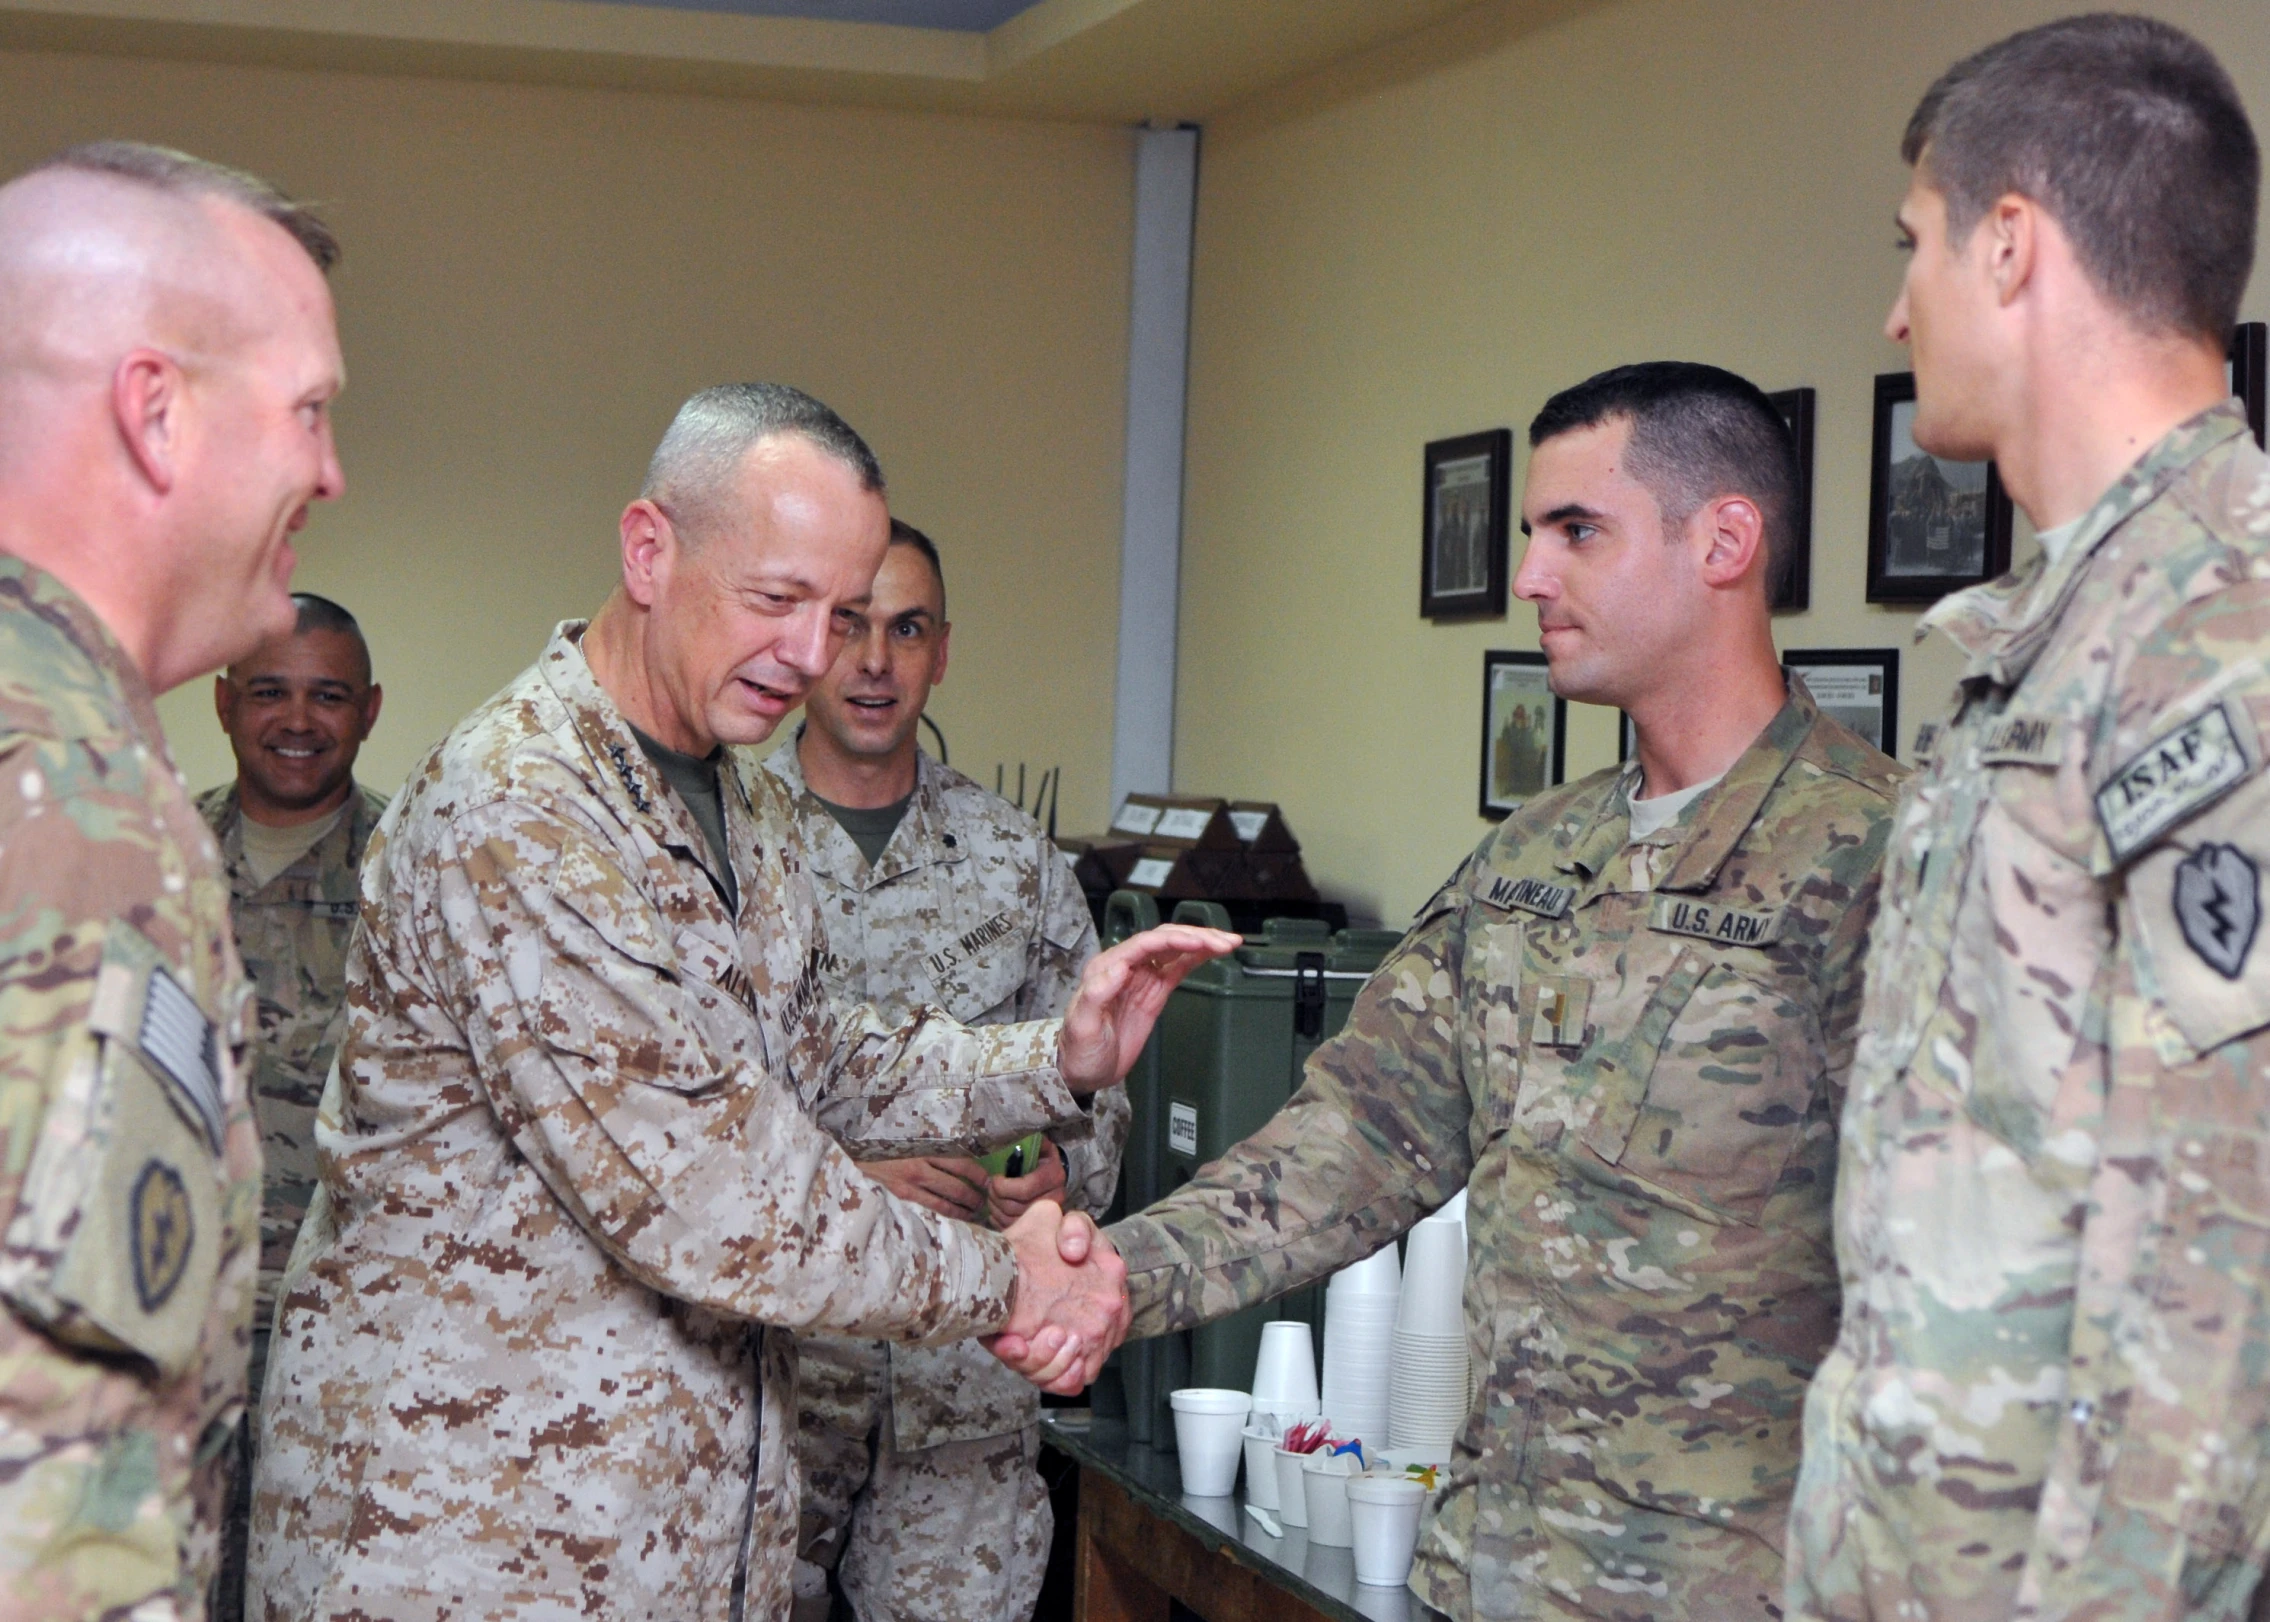 military men in suits and hats shake hands in a room